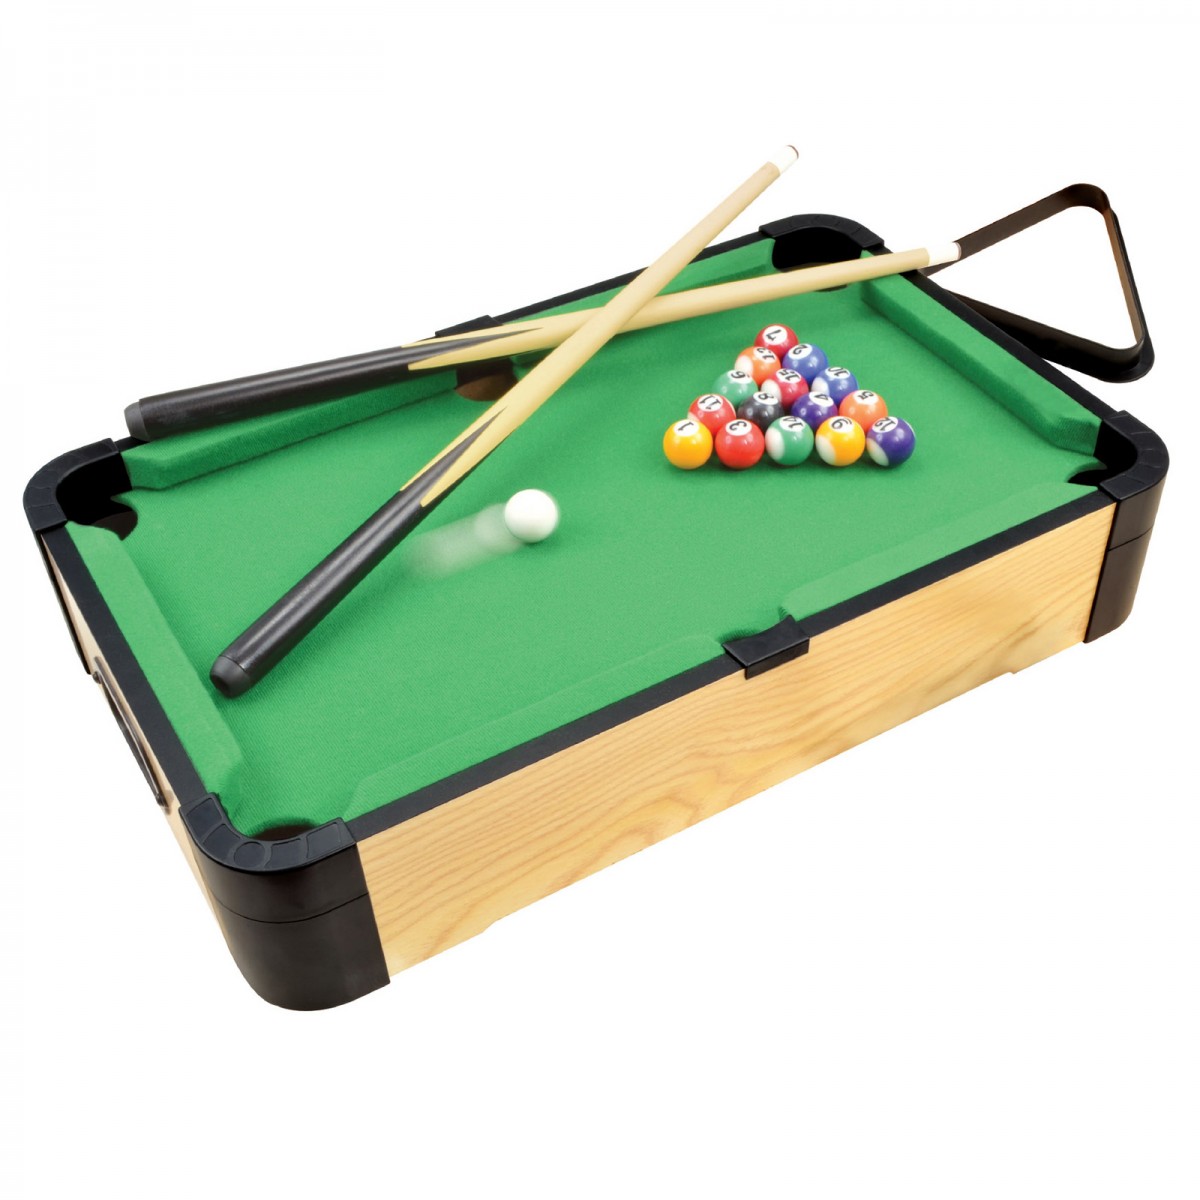 Tabletop Billiards All the Fun of a Full size table 